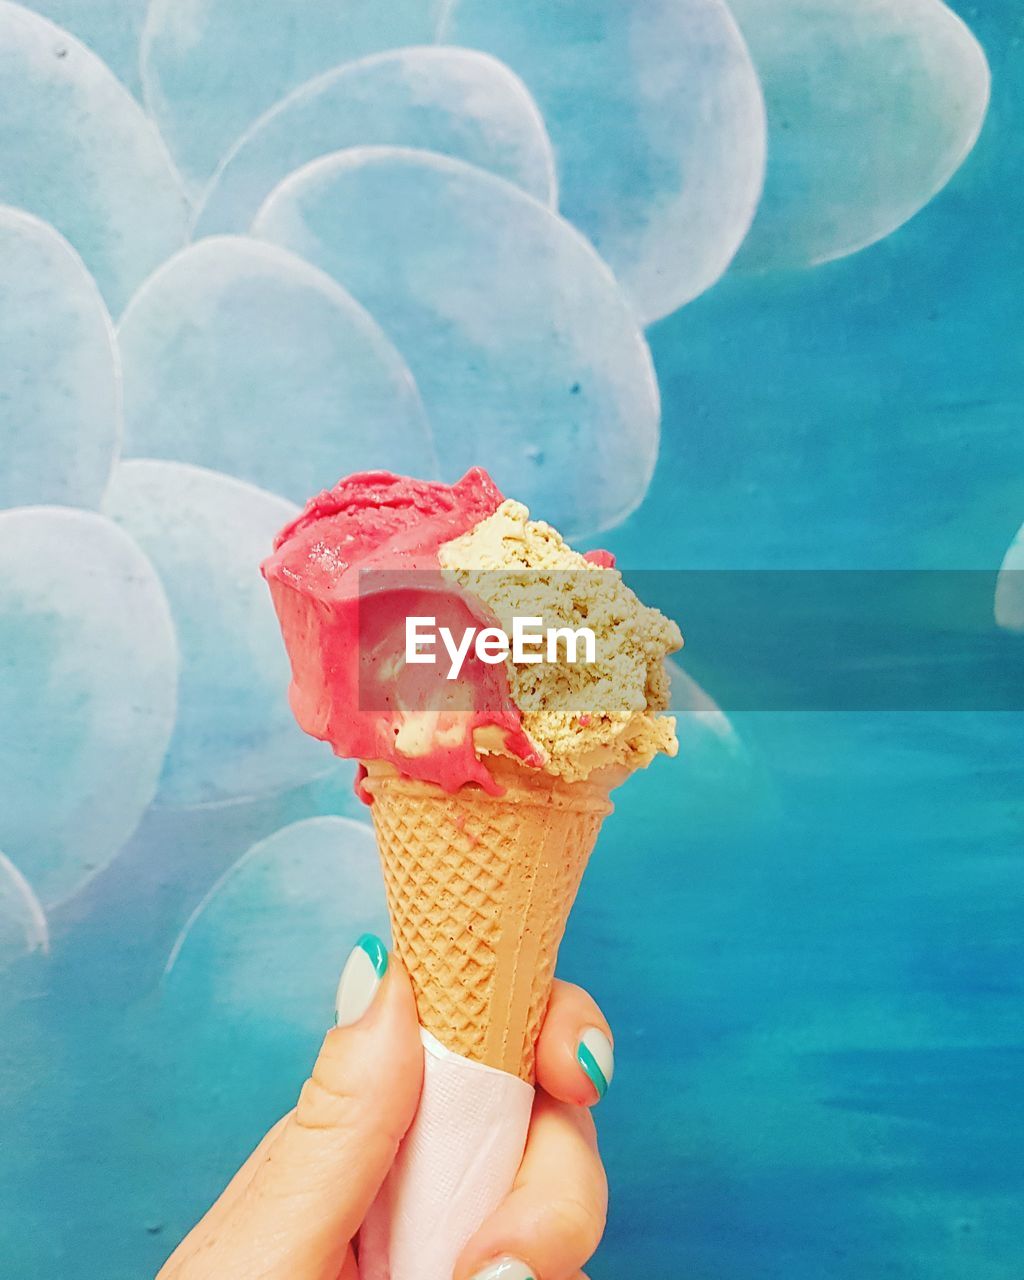 CROPPED HAND HOLDING ICE CREAM CONE AGAINST BLUE SKY